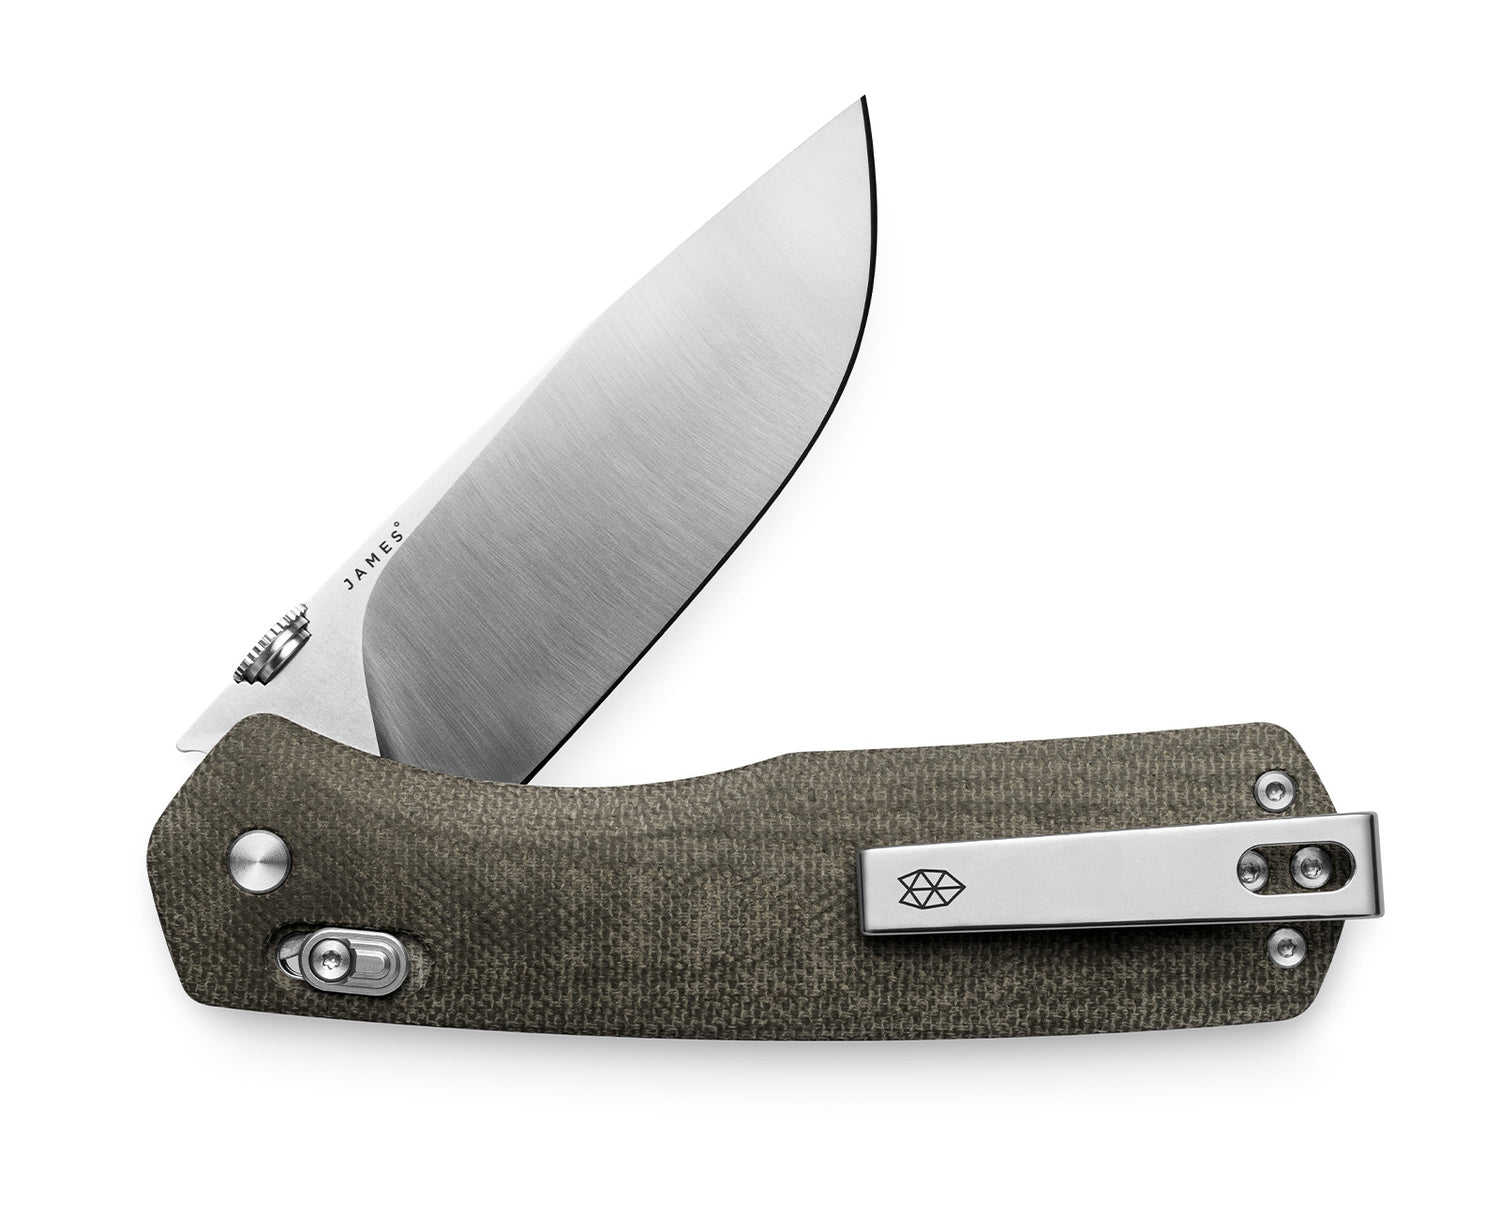 The Carter XL knife with OD green handle and stainless steel blade.